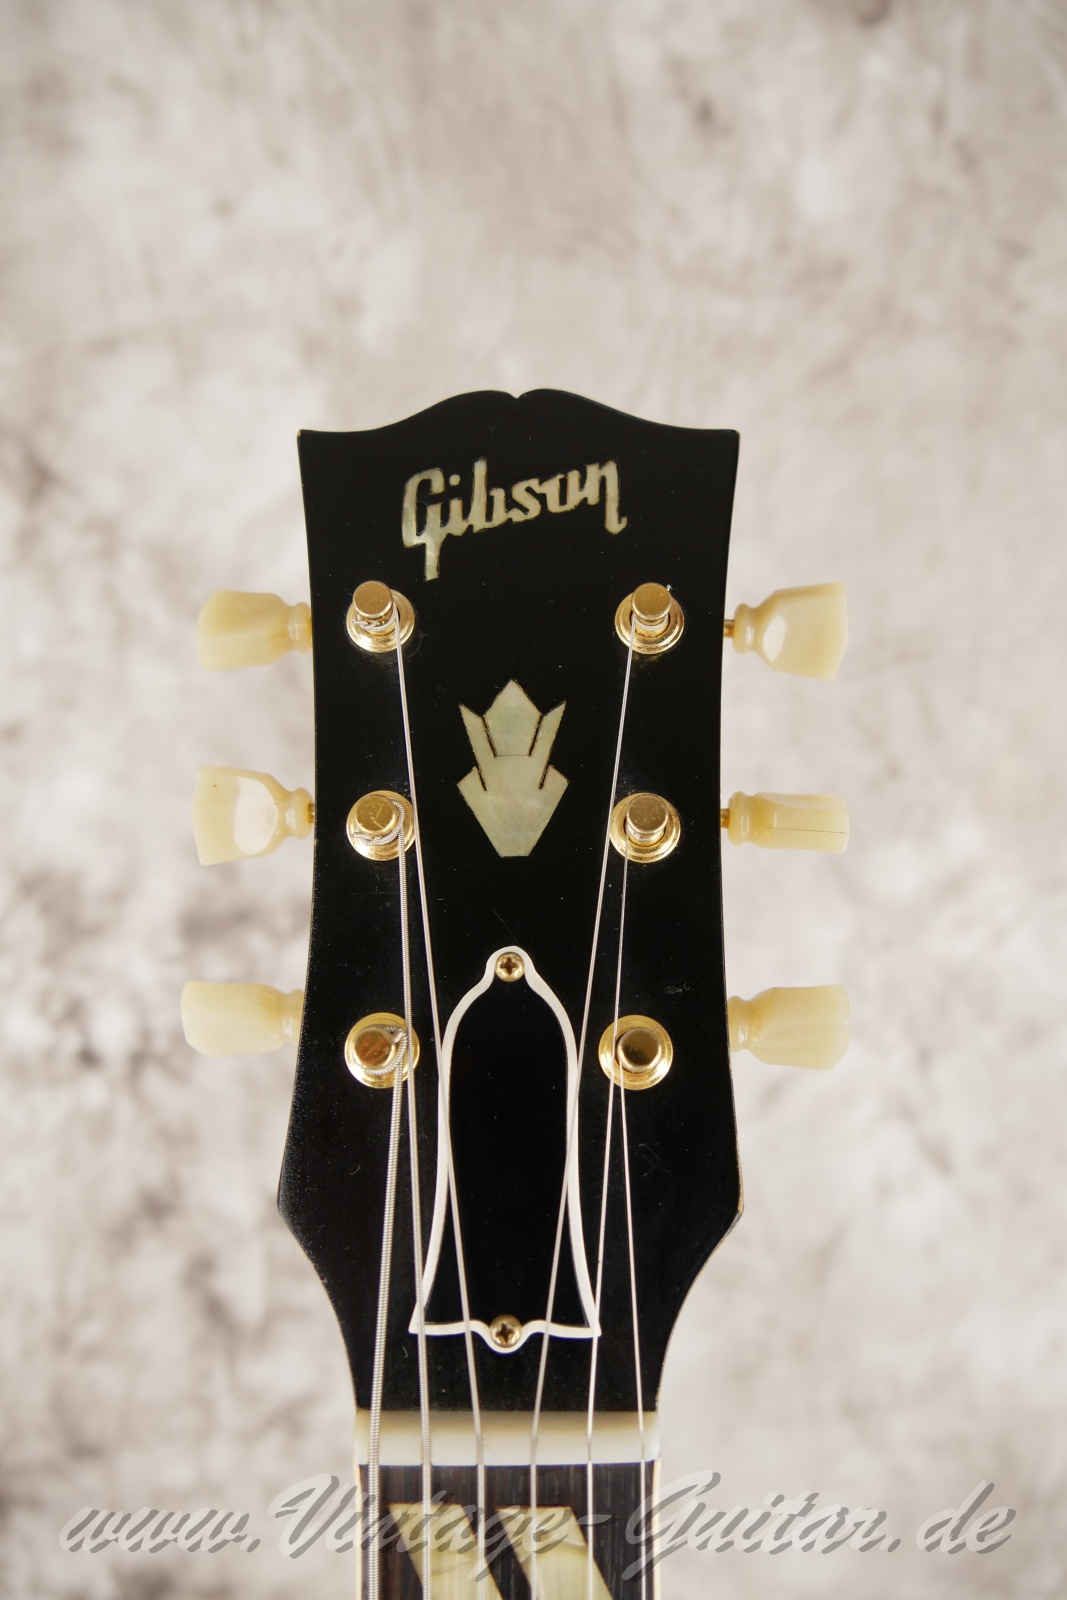 Gibson-ES-295-refinished-1953-gold-003.jpg